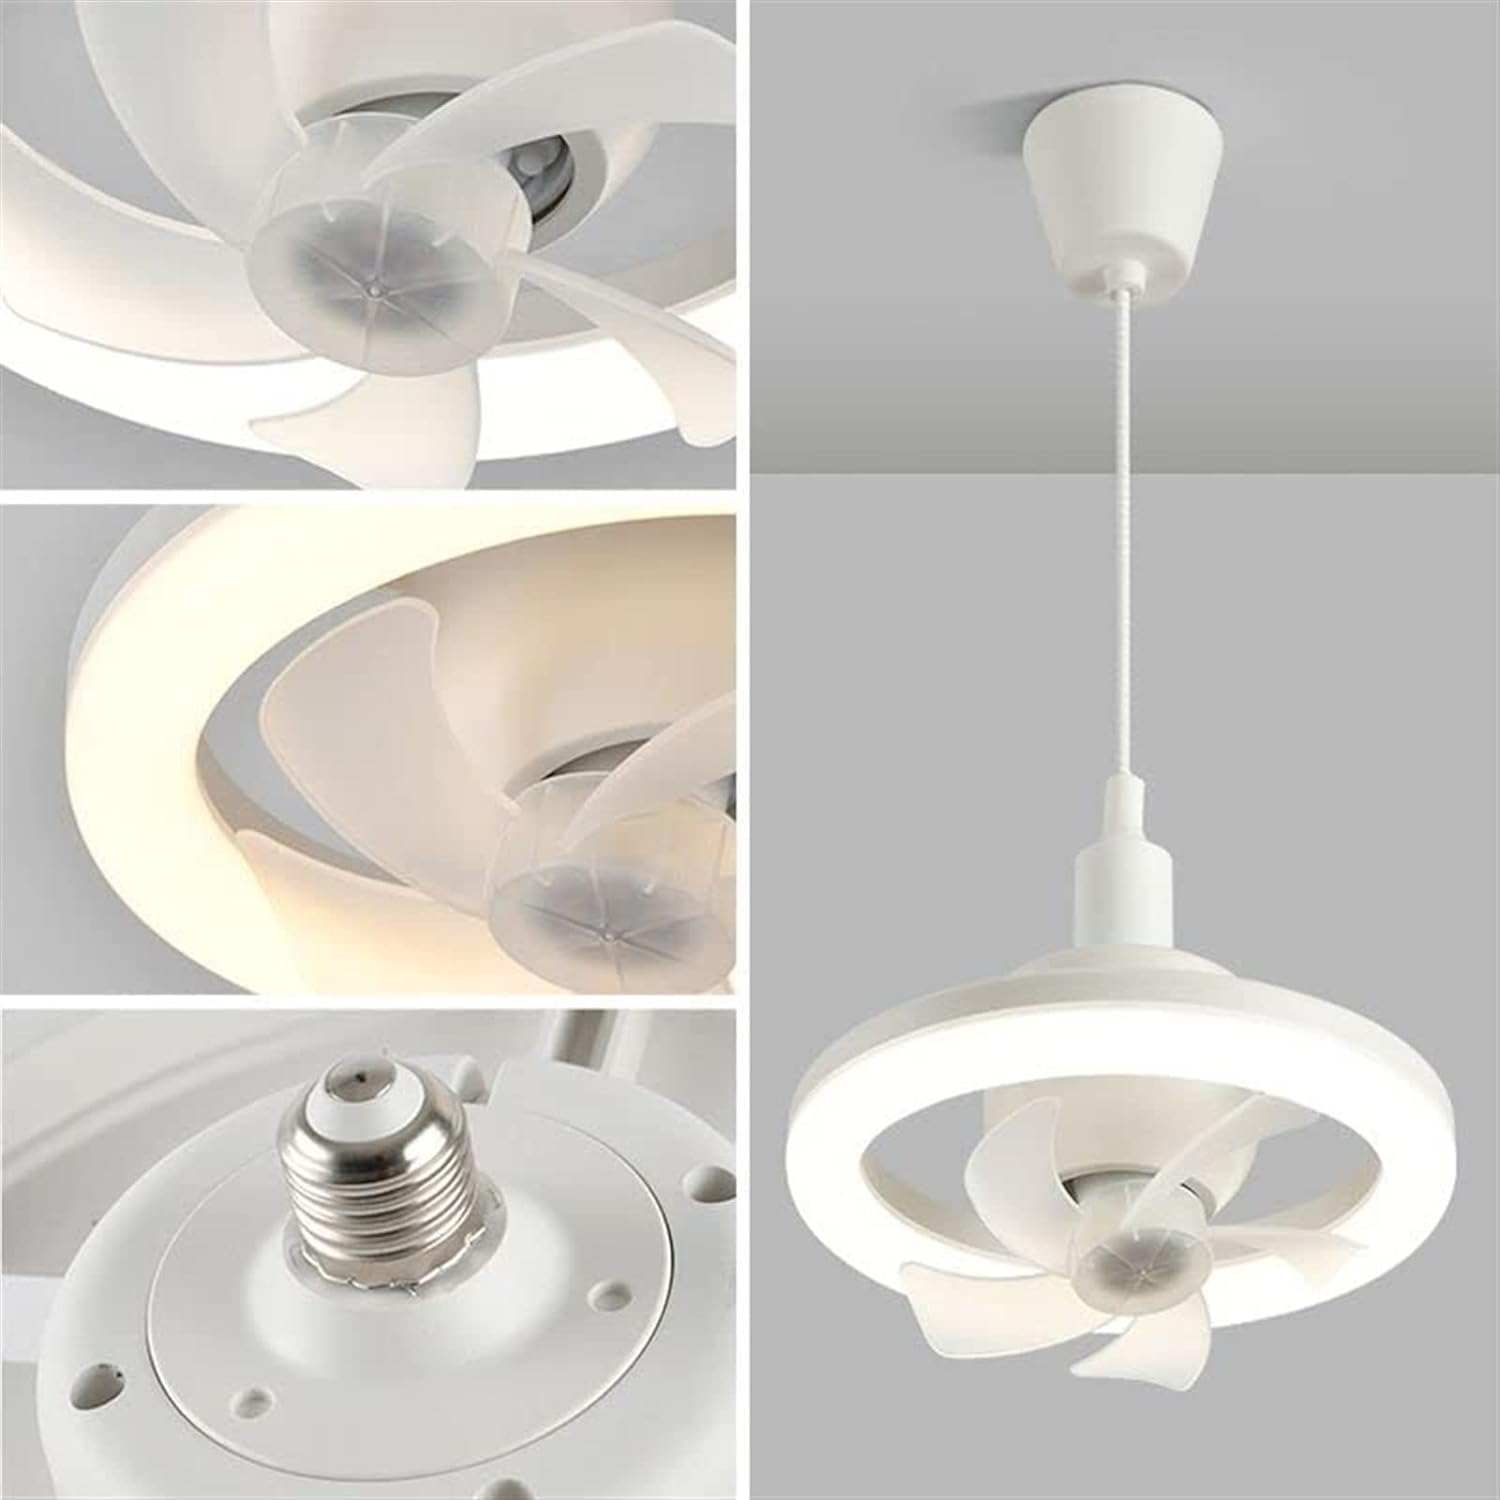 A close-up view of a 360° Rotation LED Fan Light hanging from a ceiling.